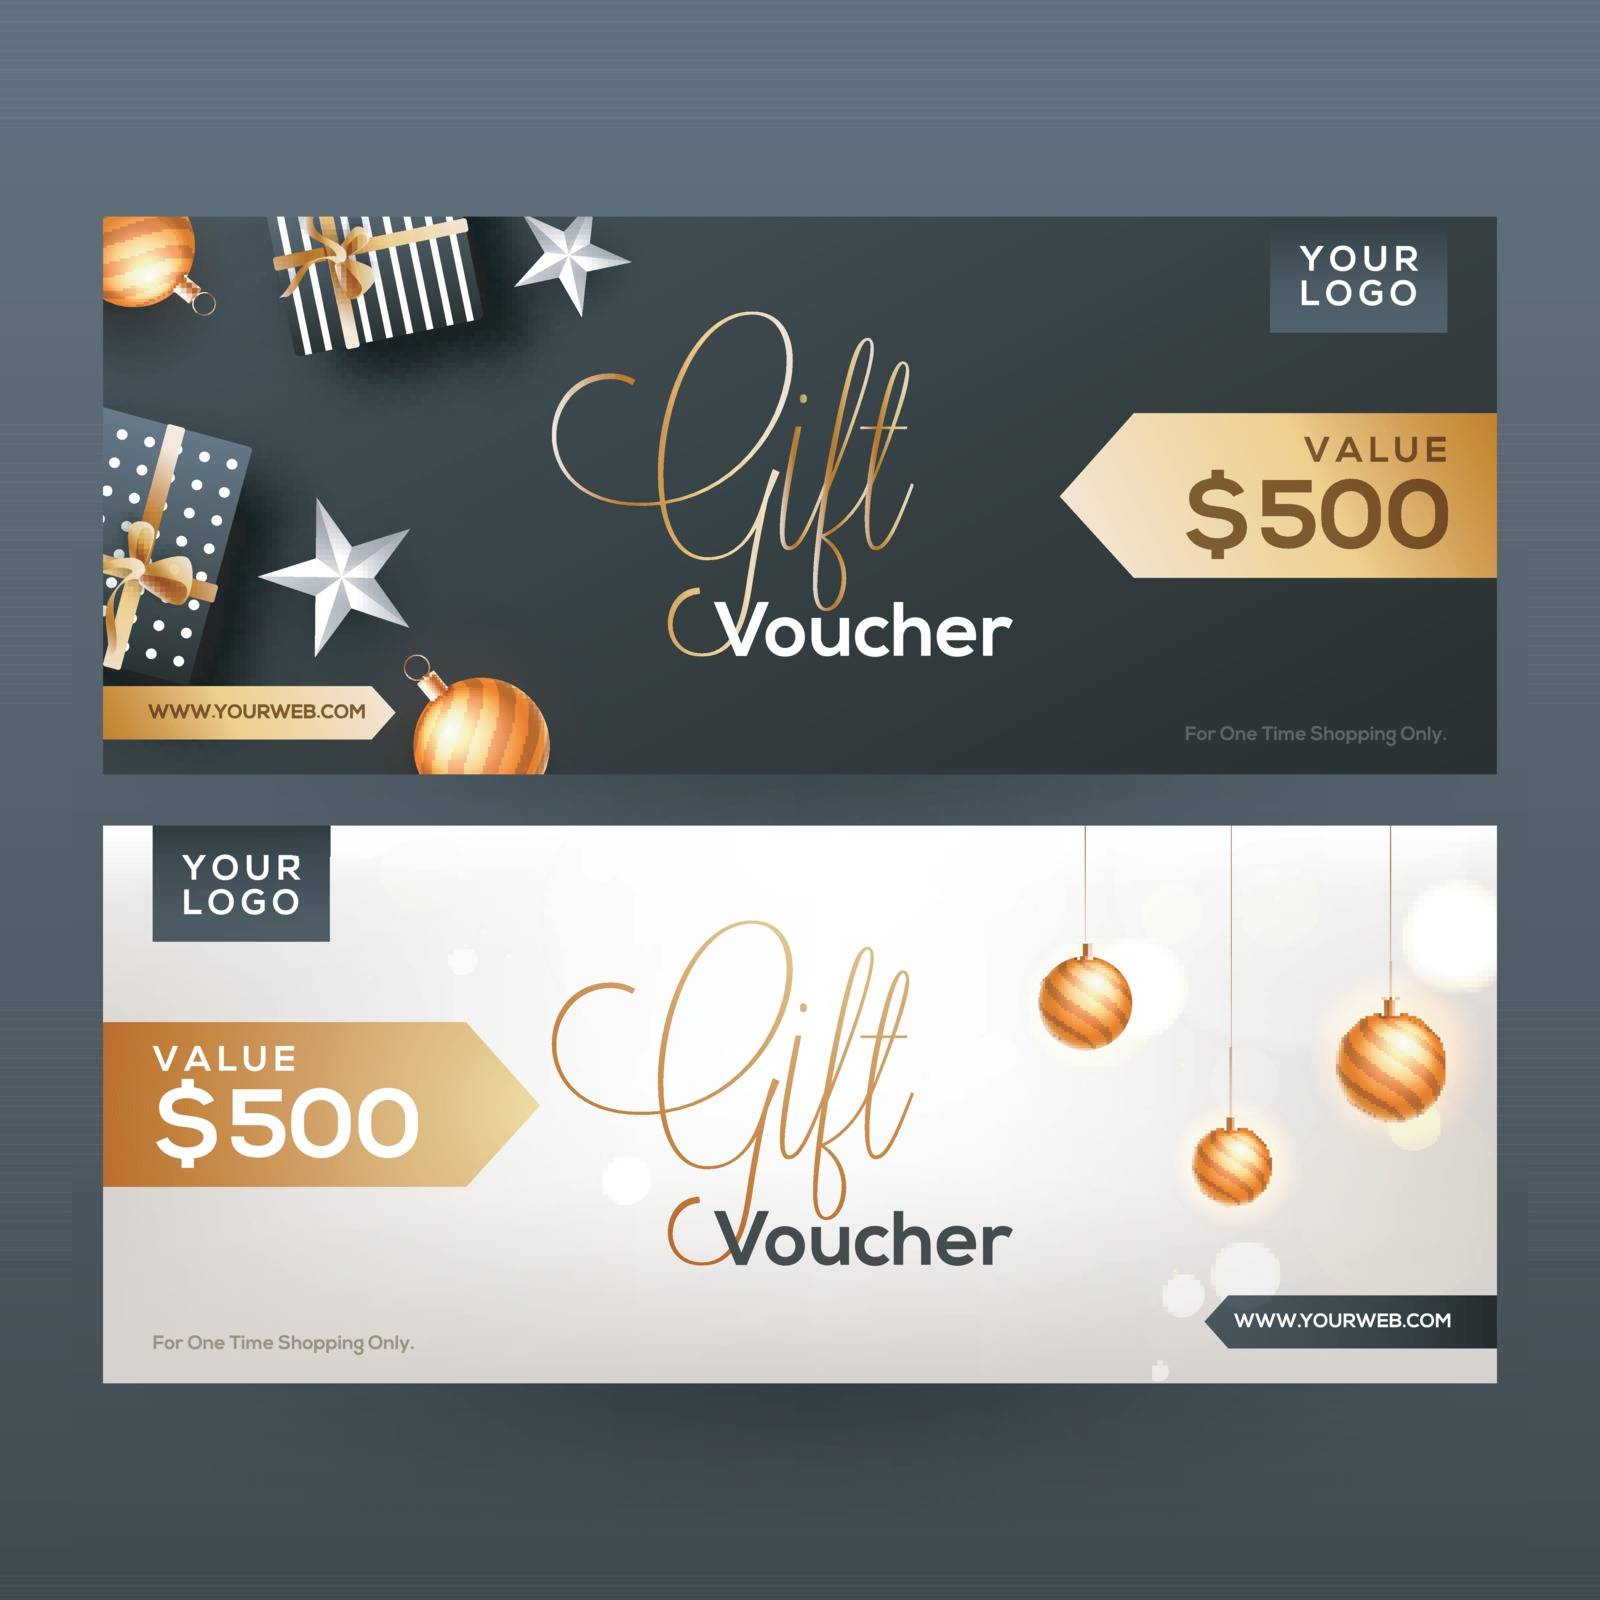 Elegant gift voucher or coupon layout with best discount offers by aispl